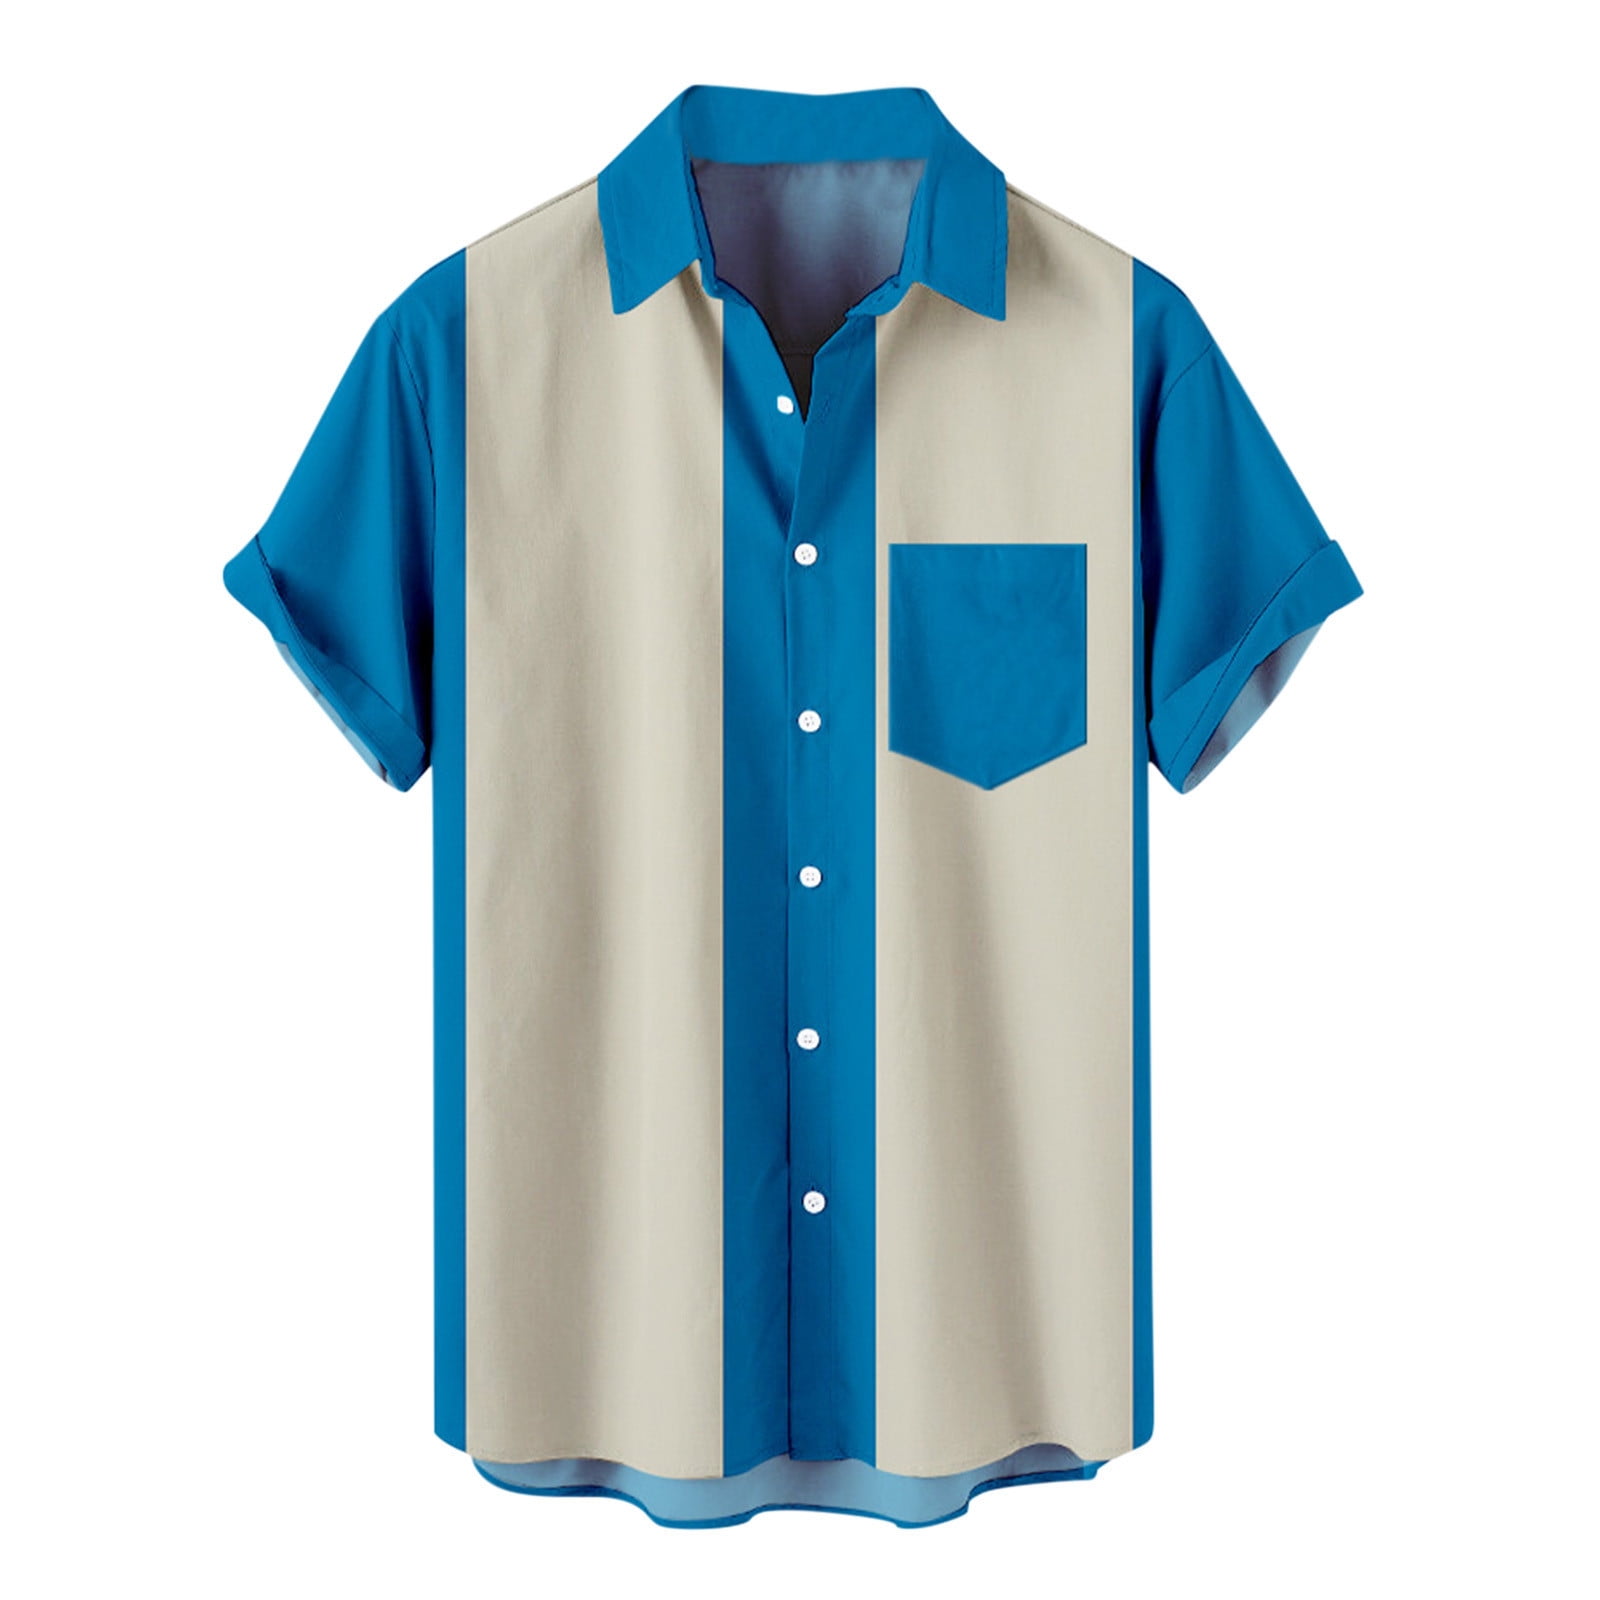 YYDGH On Clearance Men's Color Block Shirt Short Sleeve Button